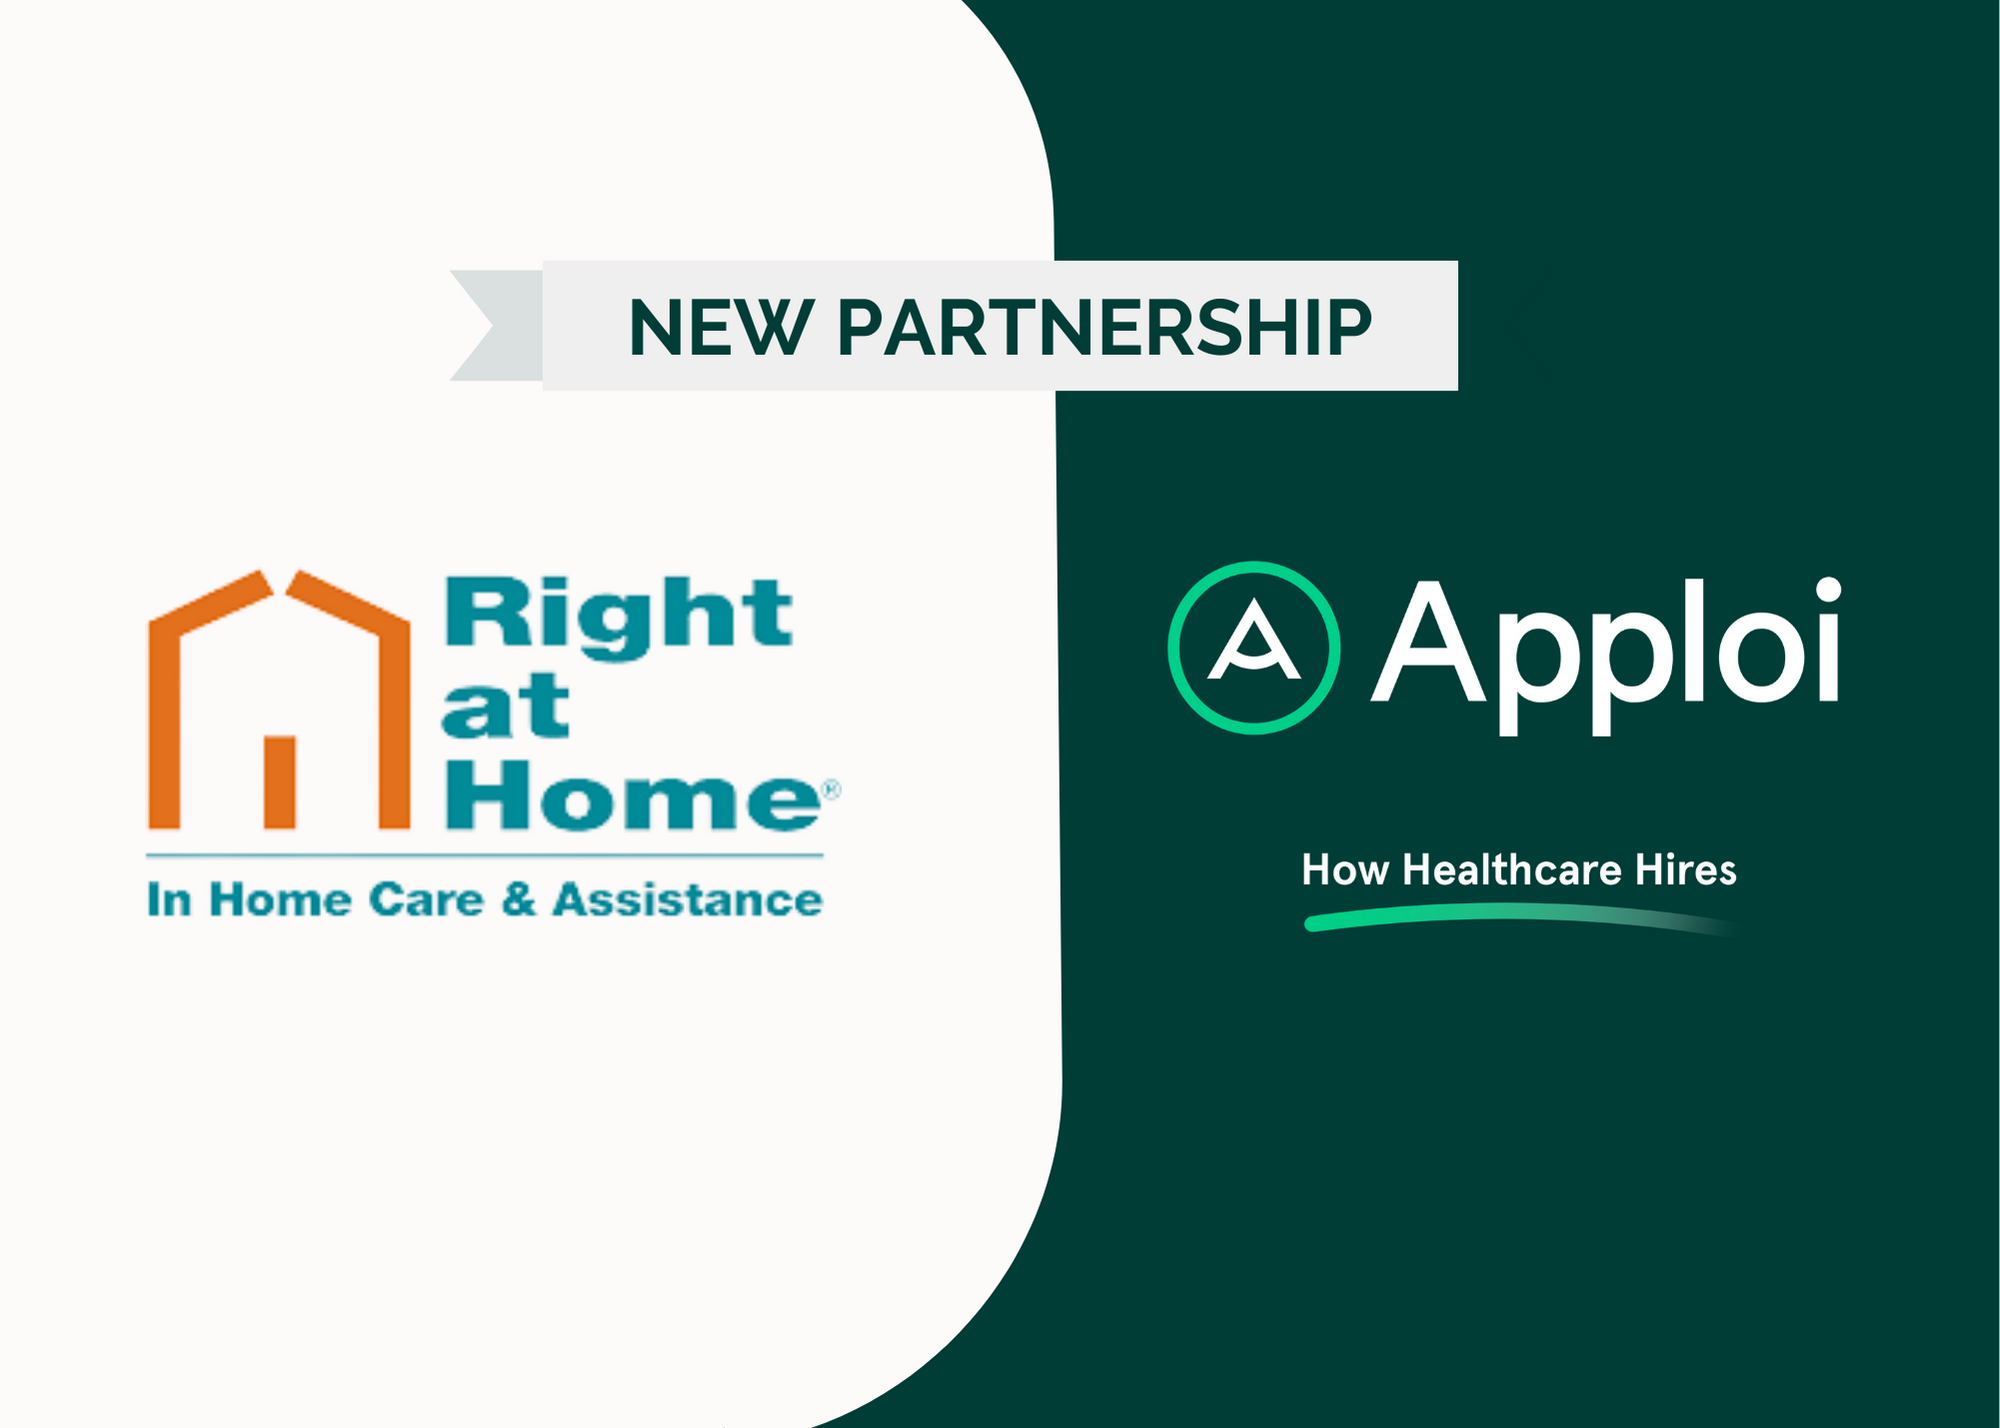 Apploi Announces Partnership With Right at Home